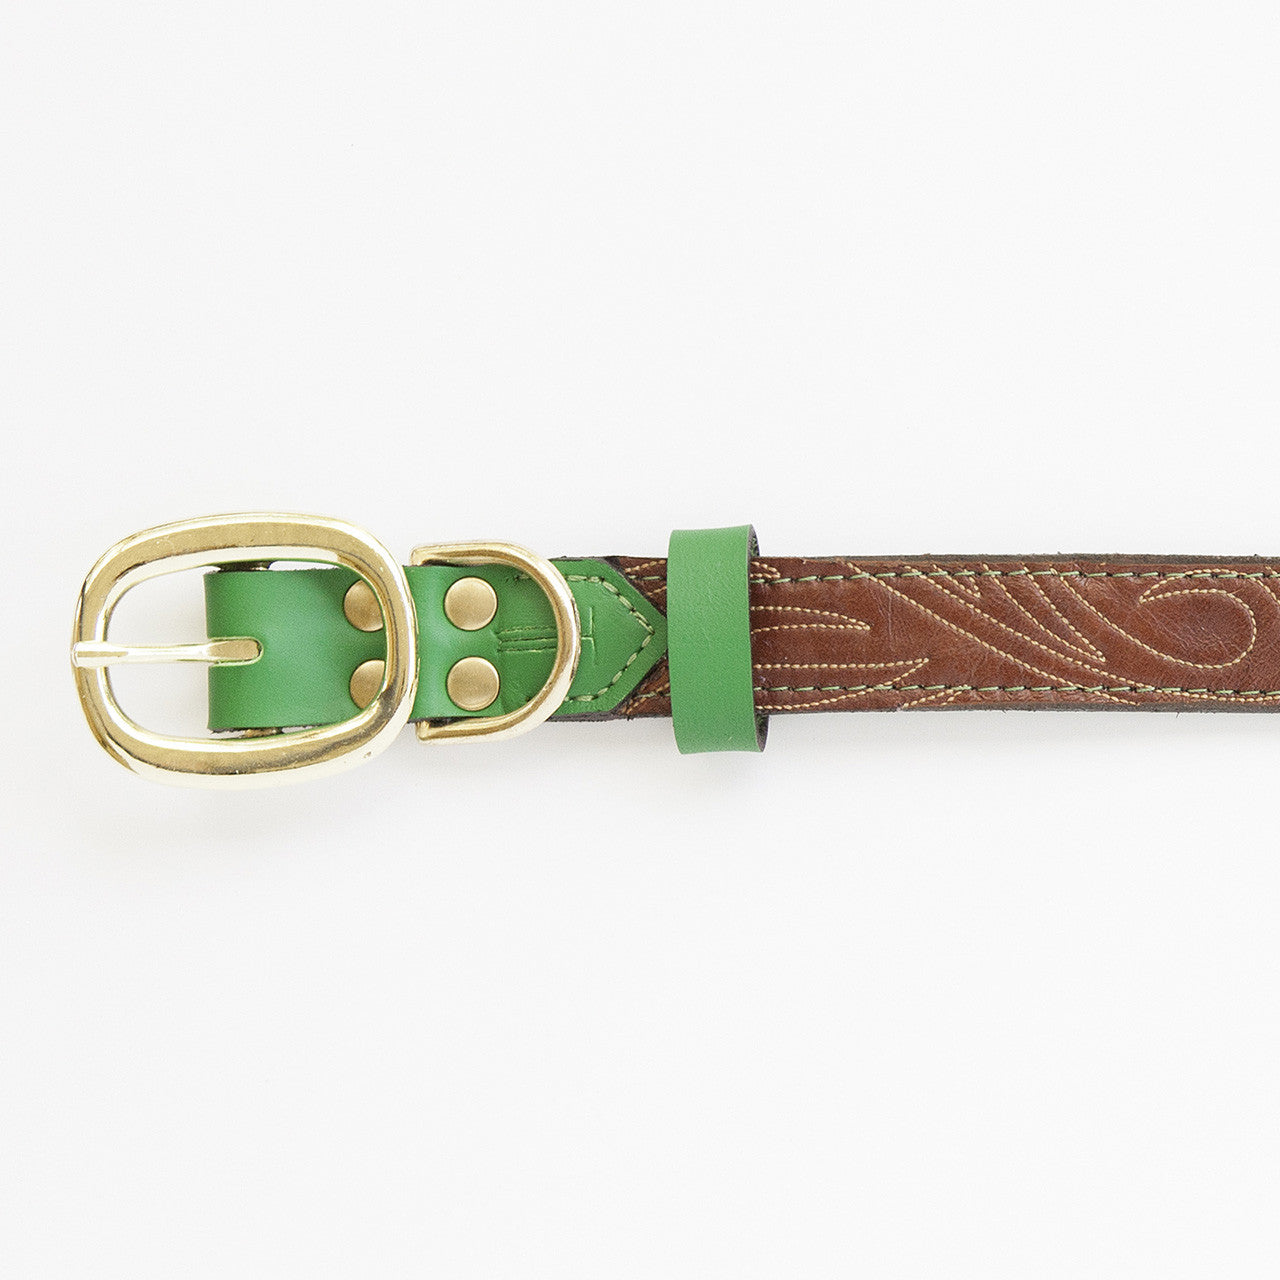 Emerald Green Dog Collar with Brown Leather + Tan Stitching (buckle)